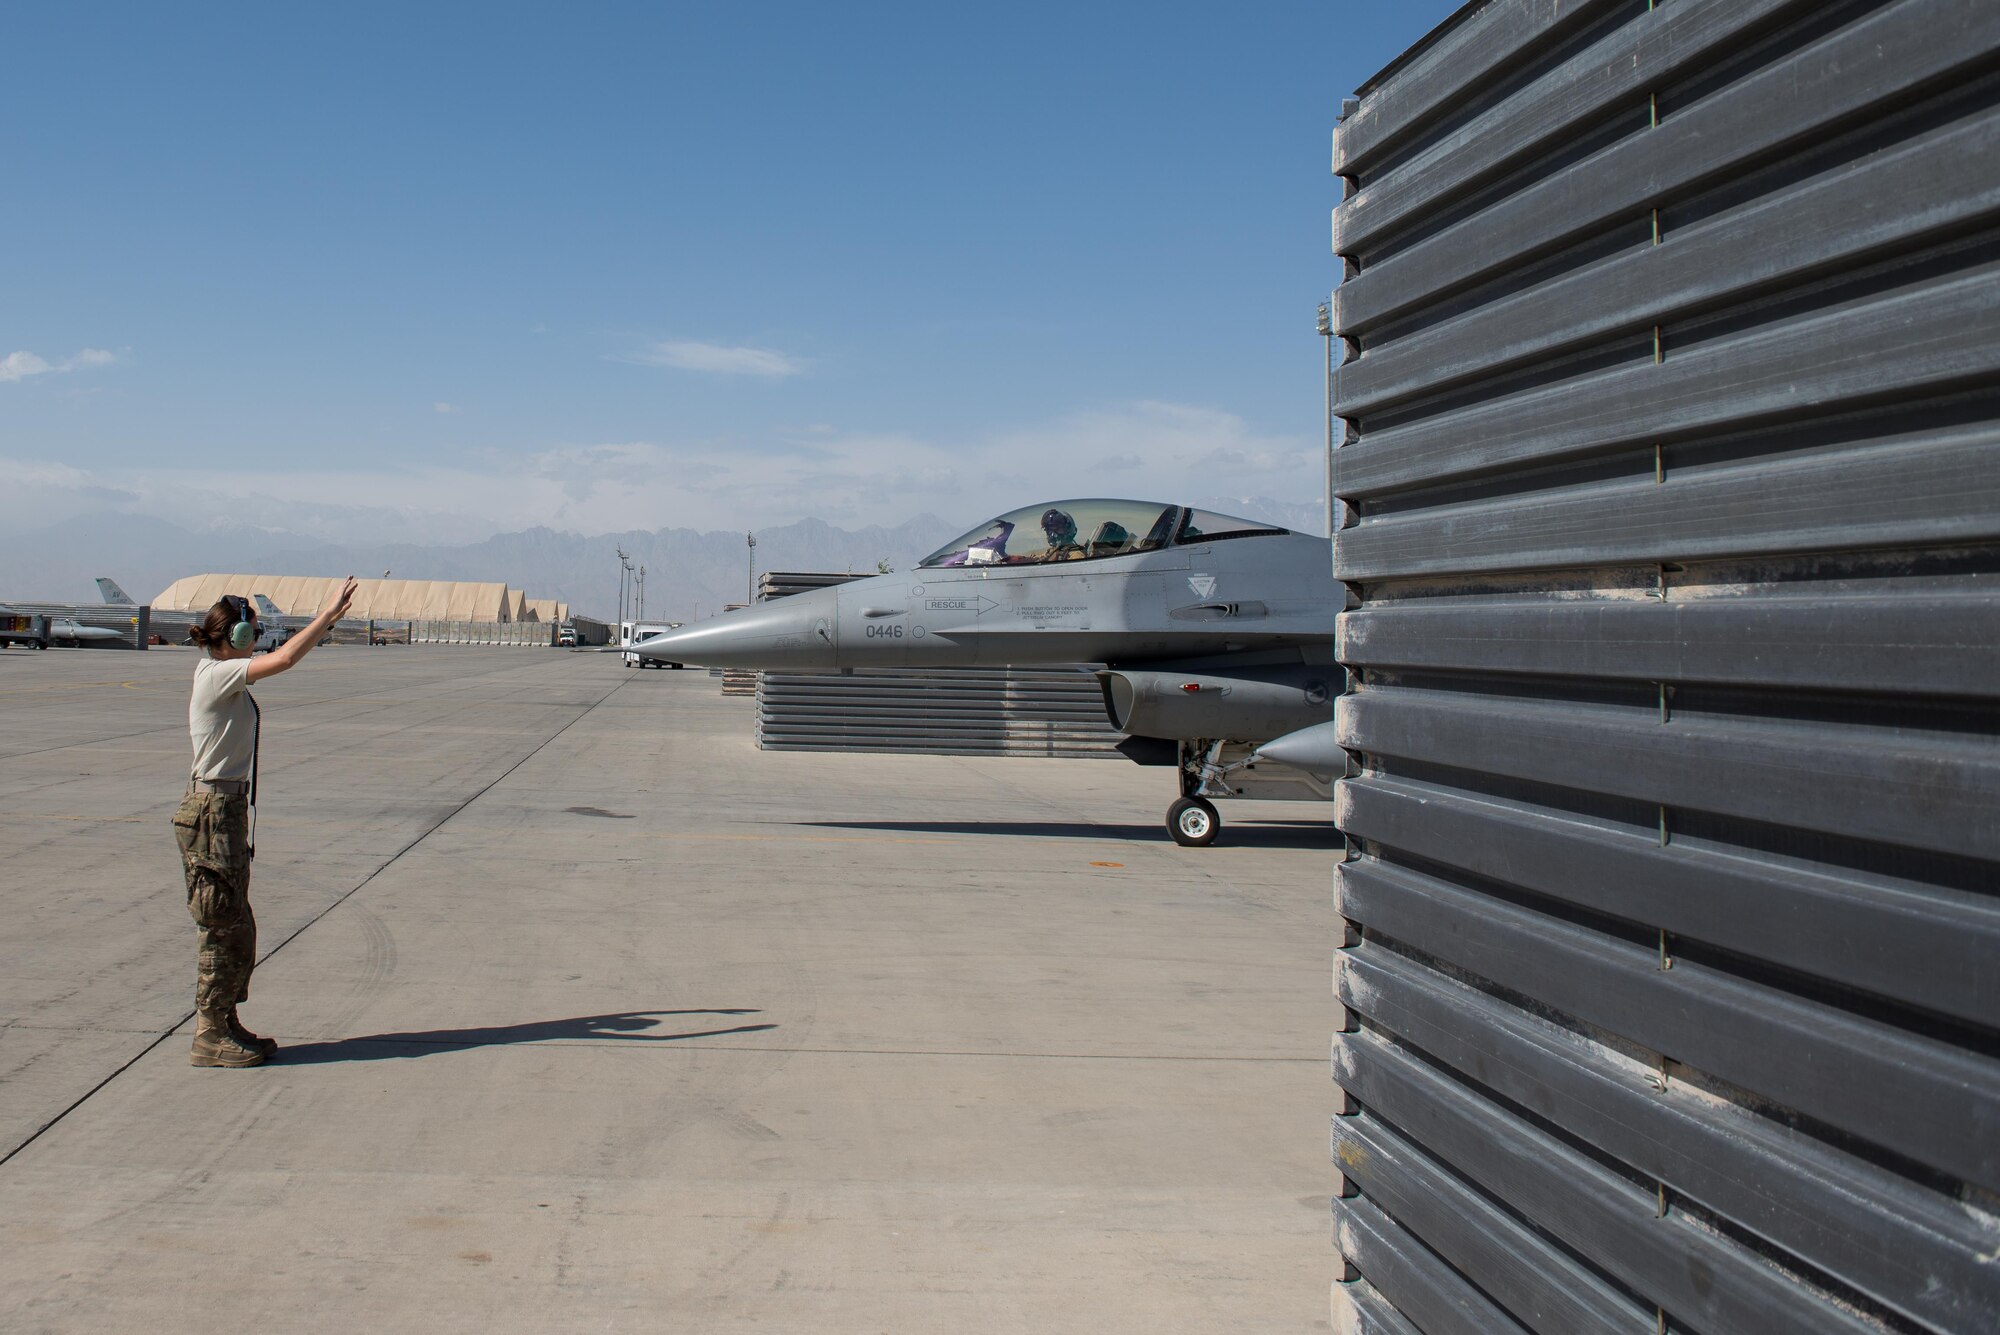 A U.S. Airman assigned to the 455th Expeditionary Aircraft Maintenance Squadron marshals an F-16 Fighting Falcon aircraft before it flies a combat sortie at Bagram Airfield, Afghanistan, June 8, 2015. The 455th EAMXS ensure Fighting Falcons on Bagram are prepared for flight and return them to a mission-ready state once they land.  (U.S. Air Force photo by Tech. Sgt. Joseph Swafford/Released)